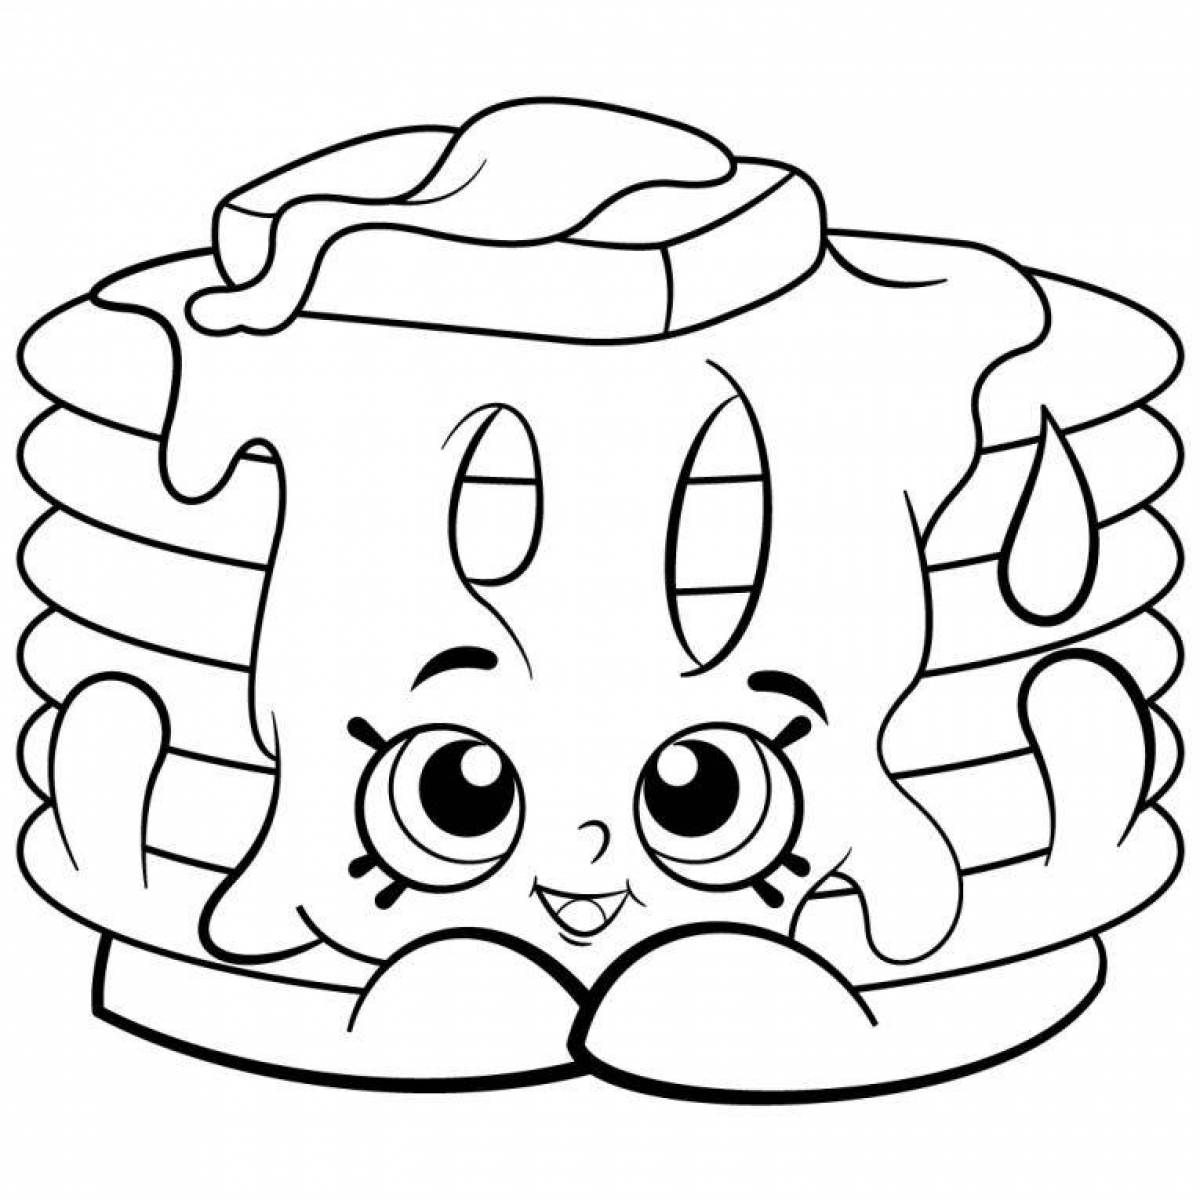 Shopkins coloring pages for girls